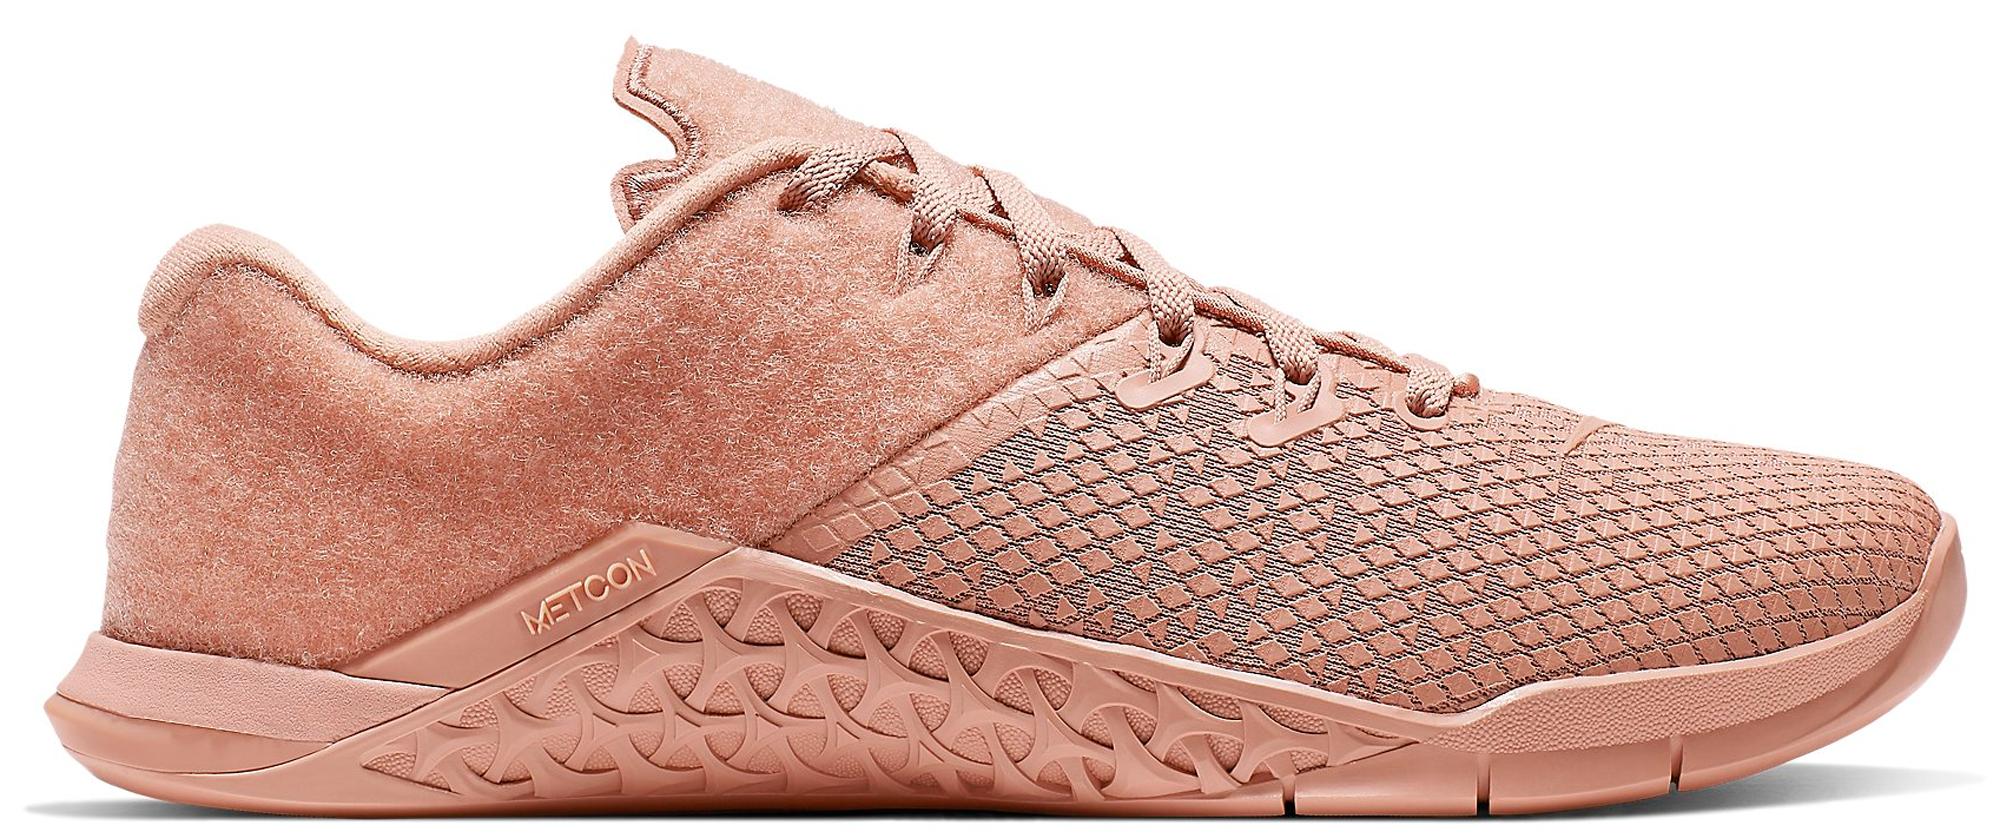 Nike Metcon 4 Patches Rose Gold (W 